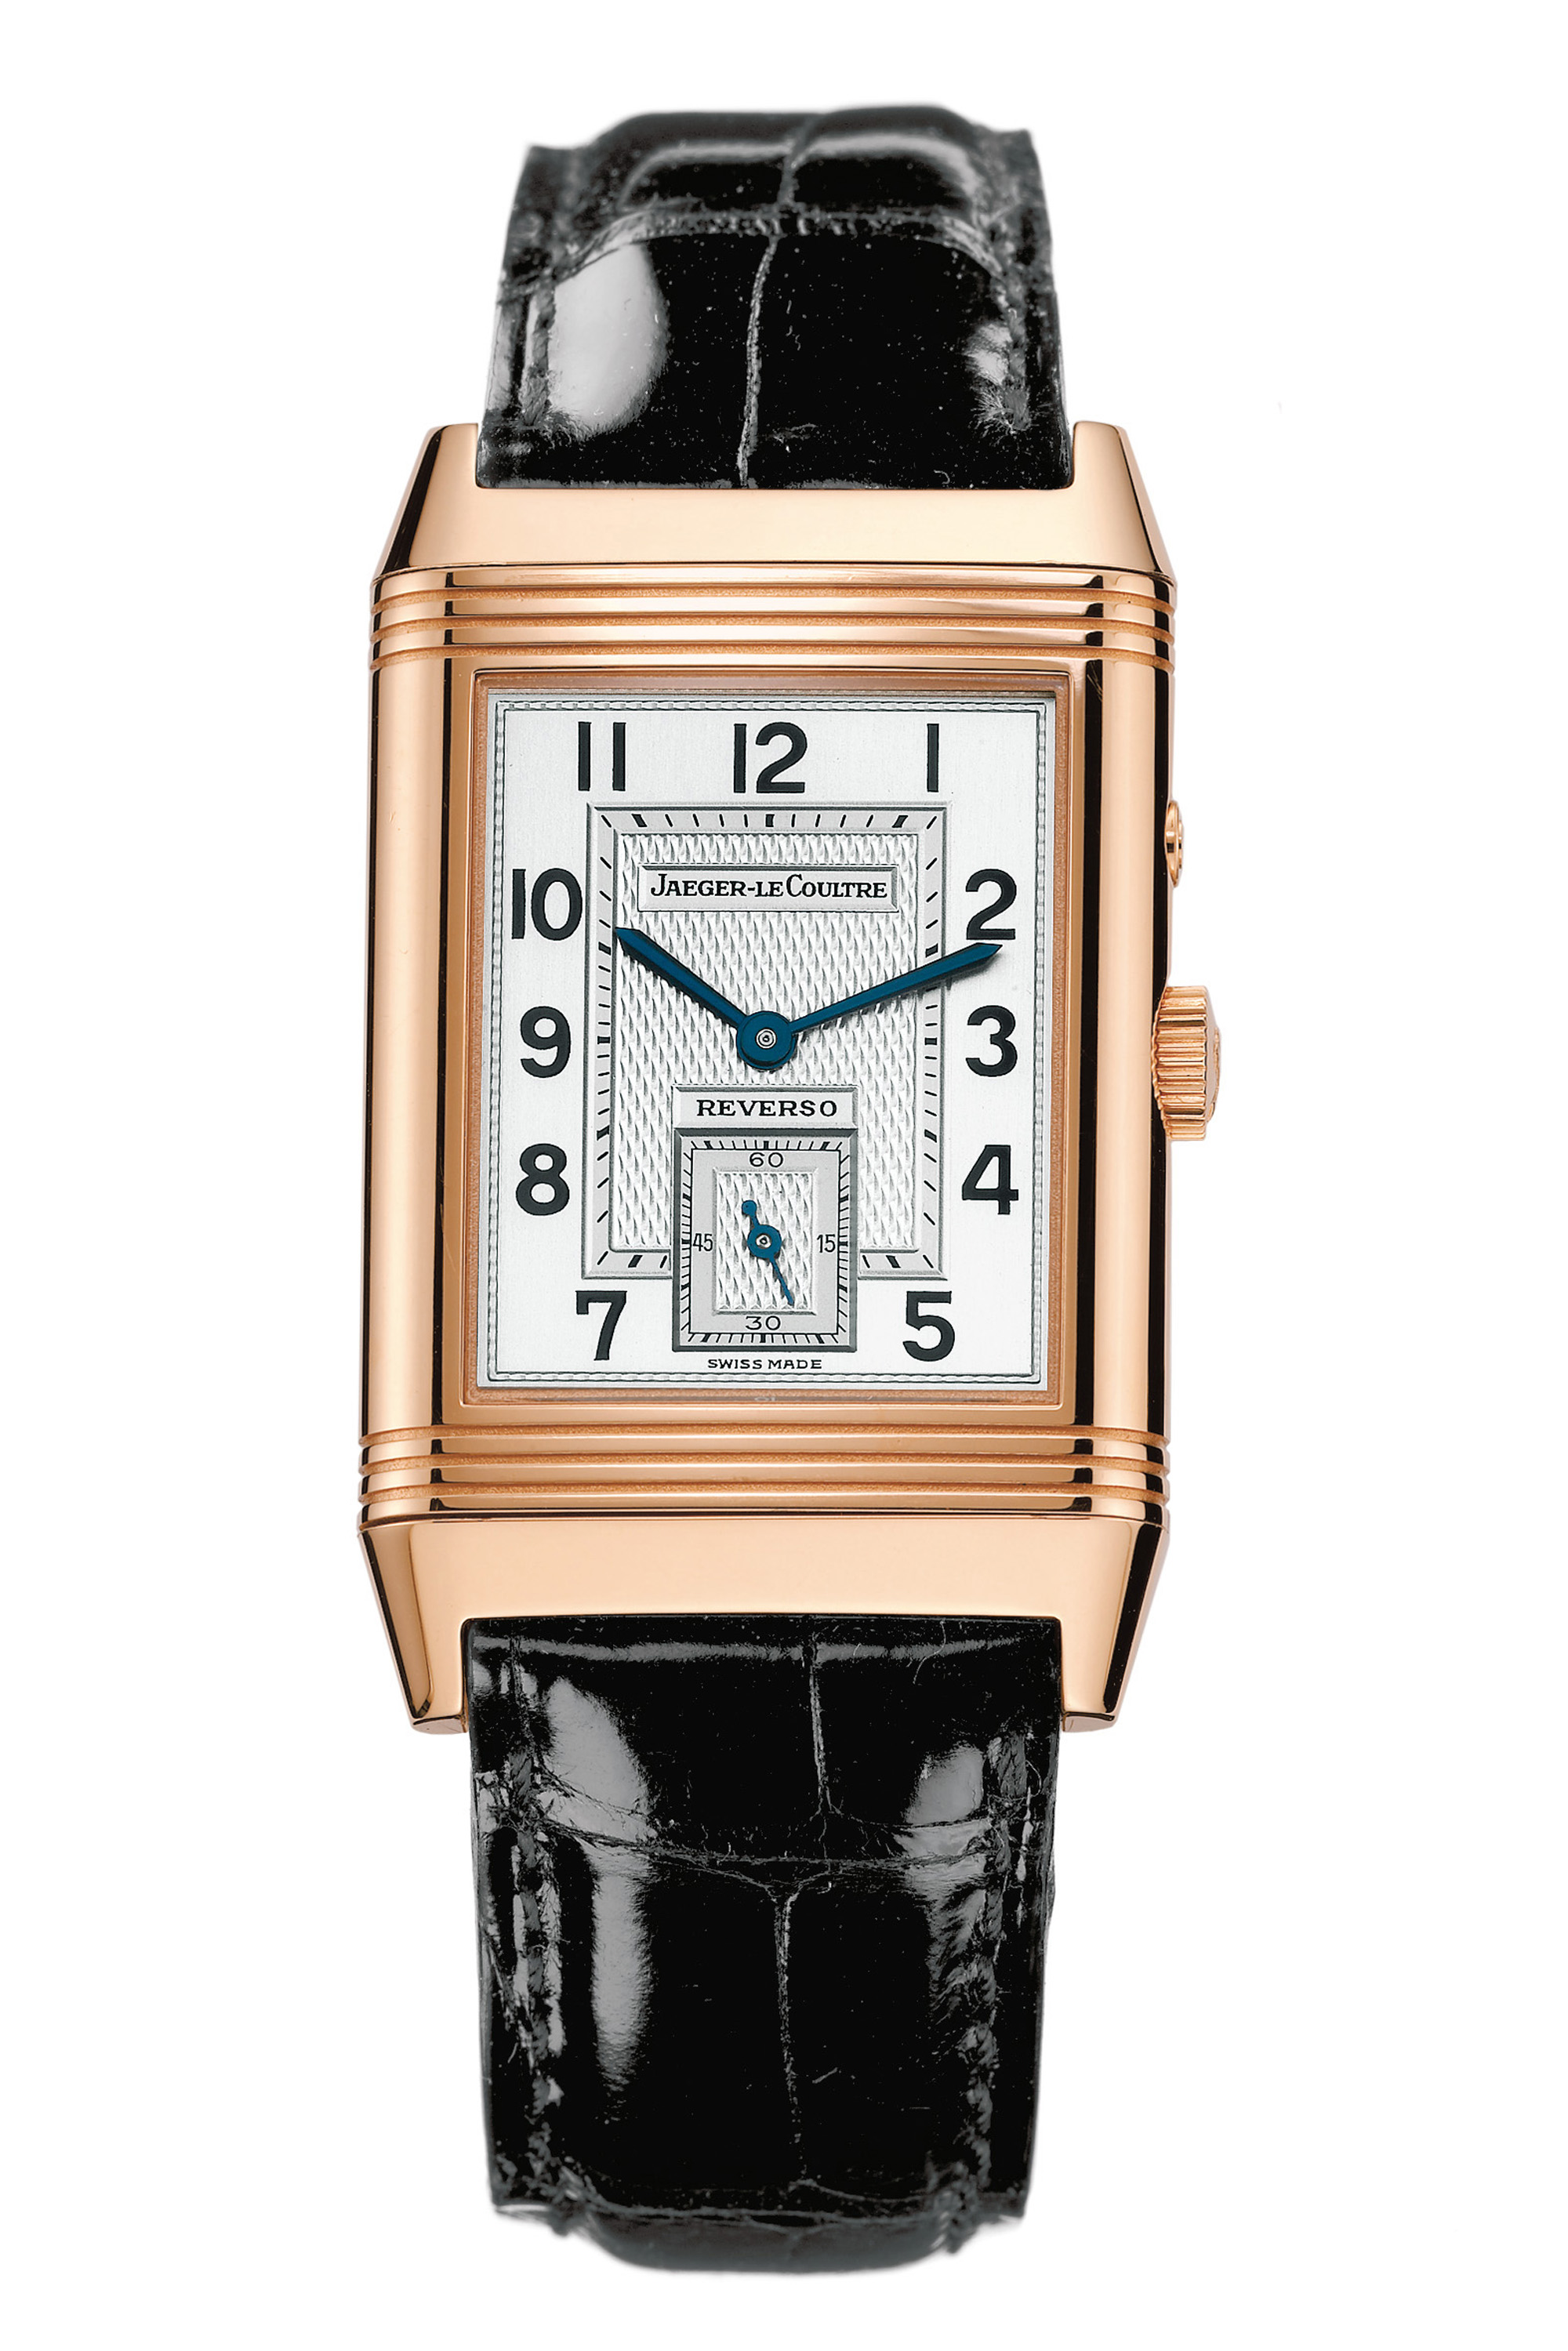 Tracing the history and evolution of the Reverso